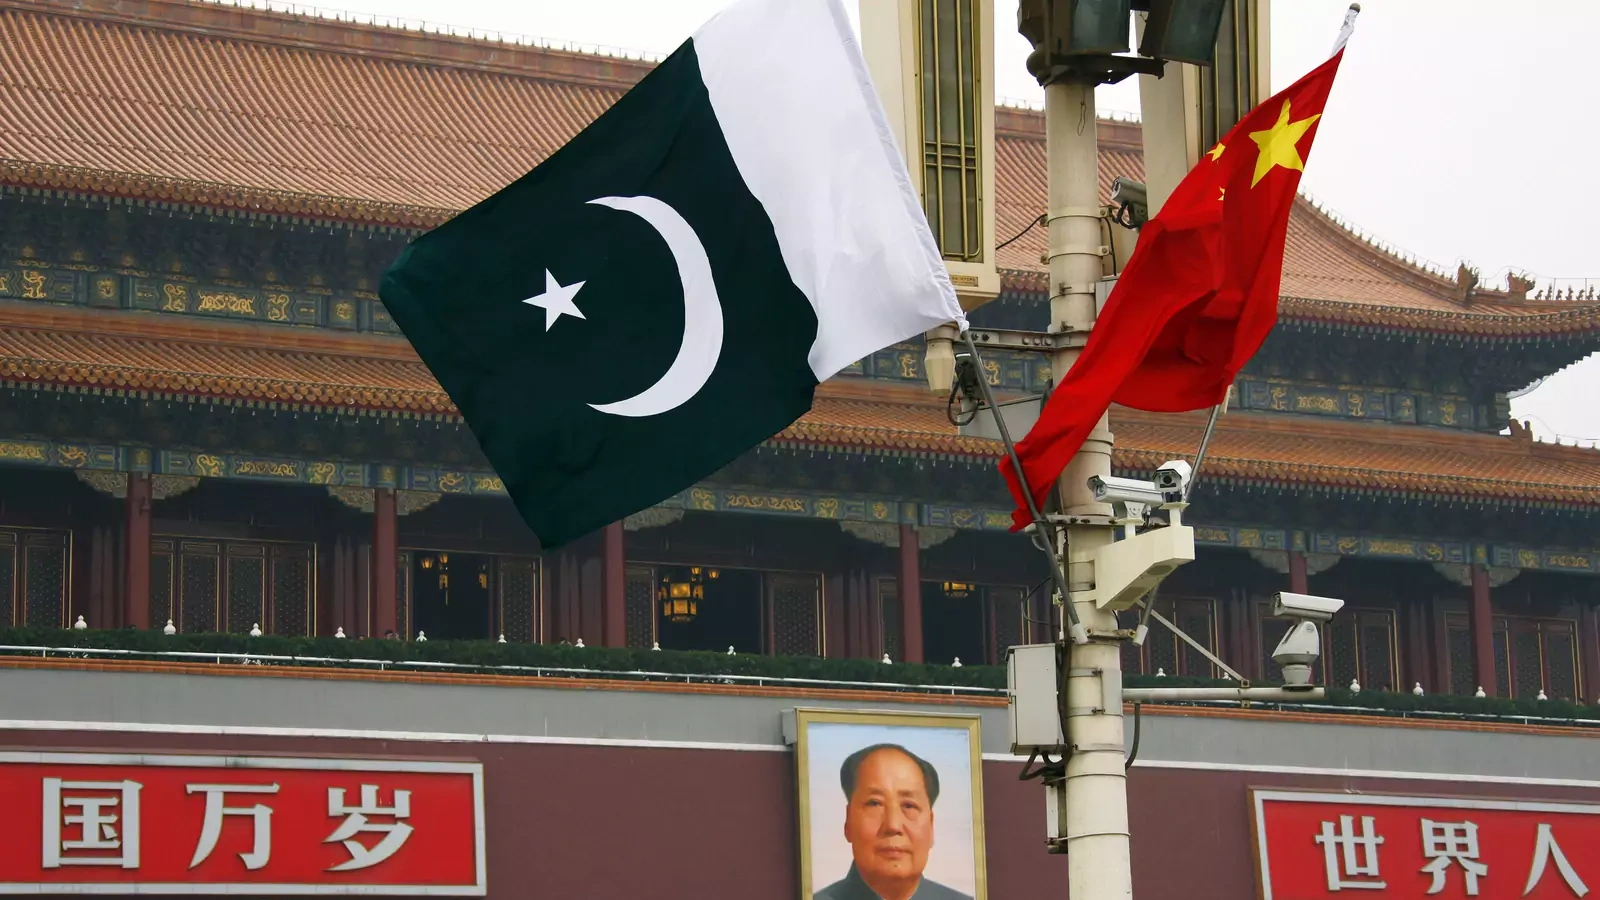 A Pakistani national flag flies alongside a Chinese national flag in front of the portrait of Chairman Mao Zedong on Beijing's Tiananmen Square.